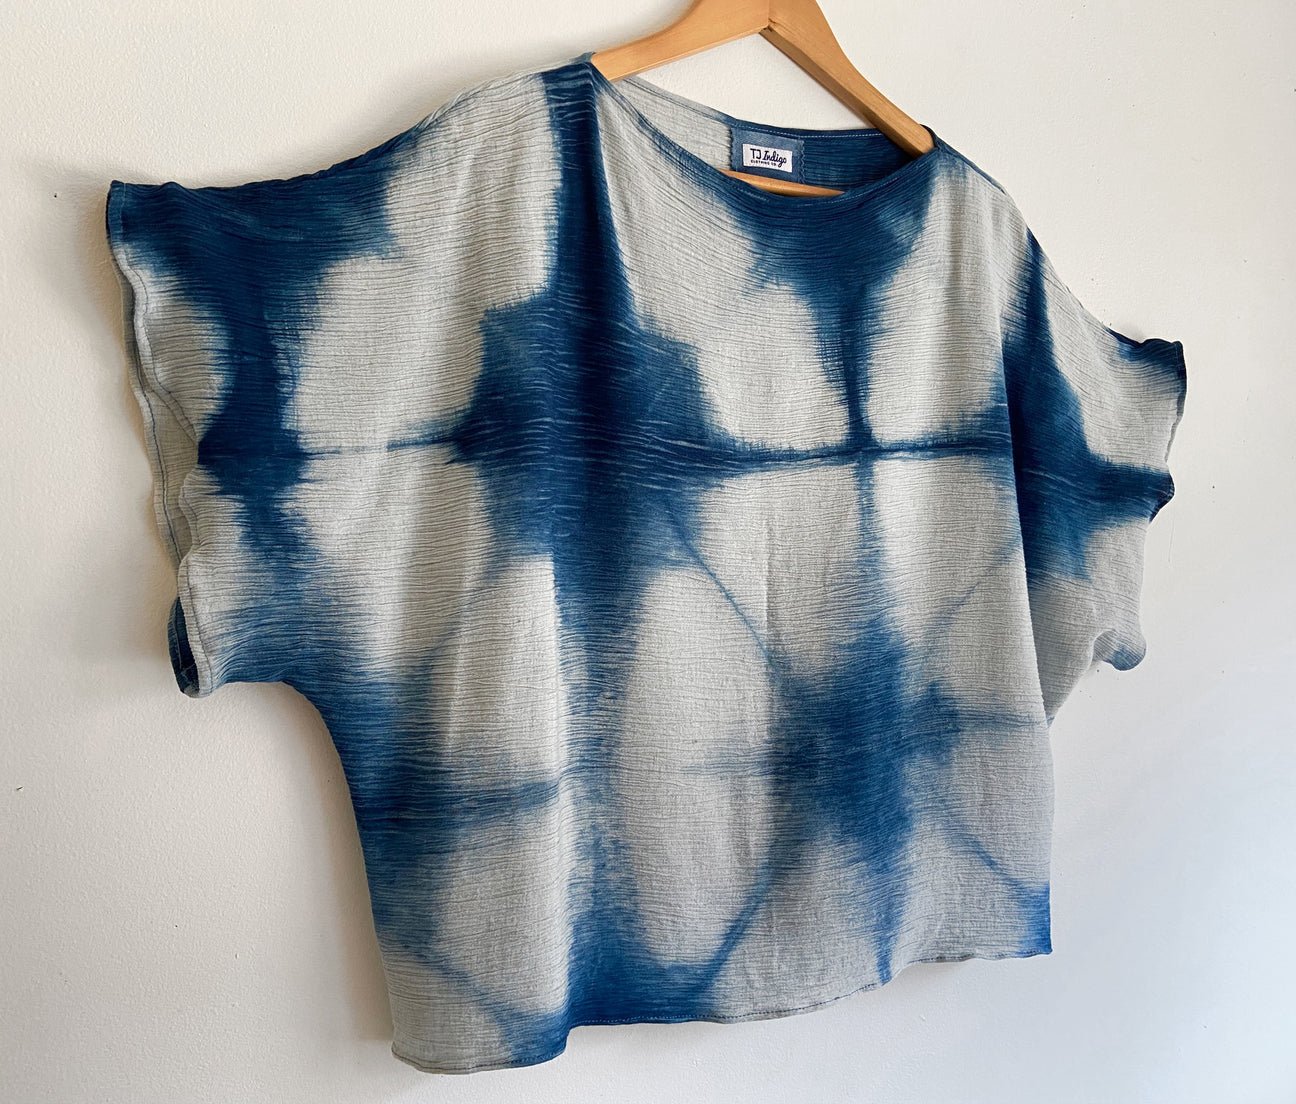 Linen Boxy Blouse in Indigo Starflower and Oat - Naturally Canada